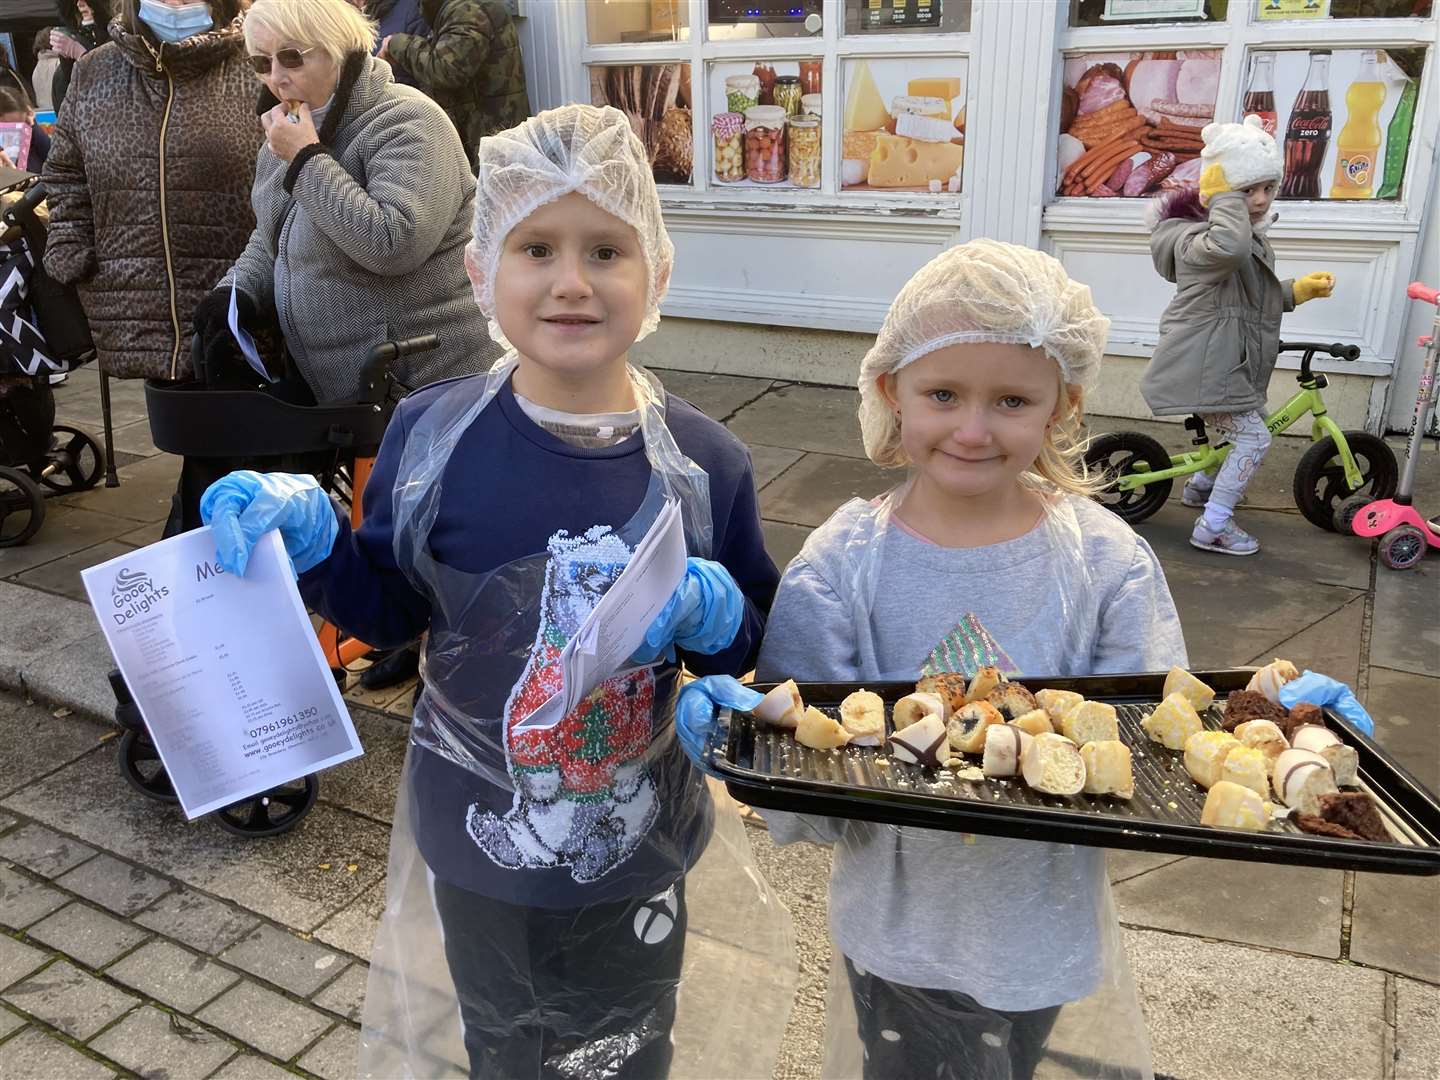 These two were handing out free samples from Gooey Delights which has recently opened in Sheerness Broadway